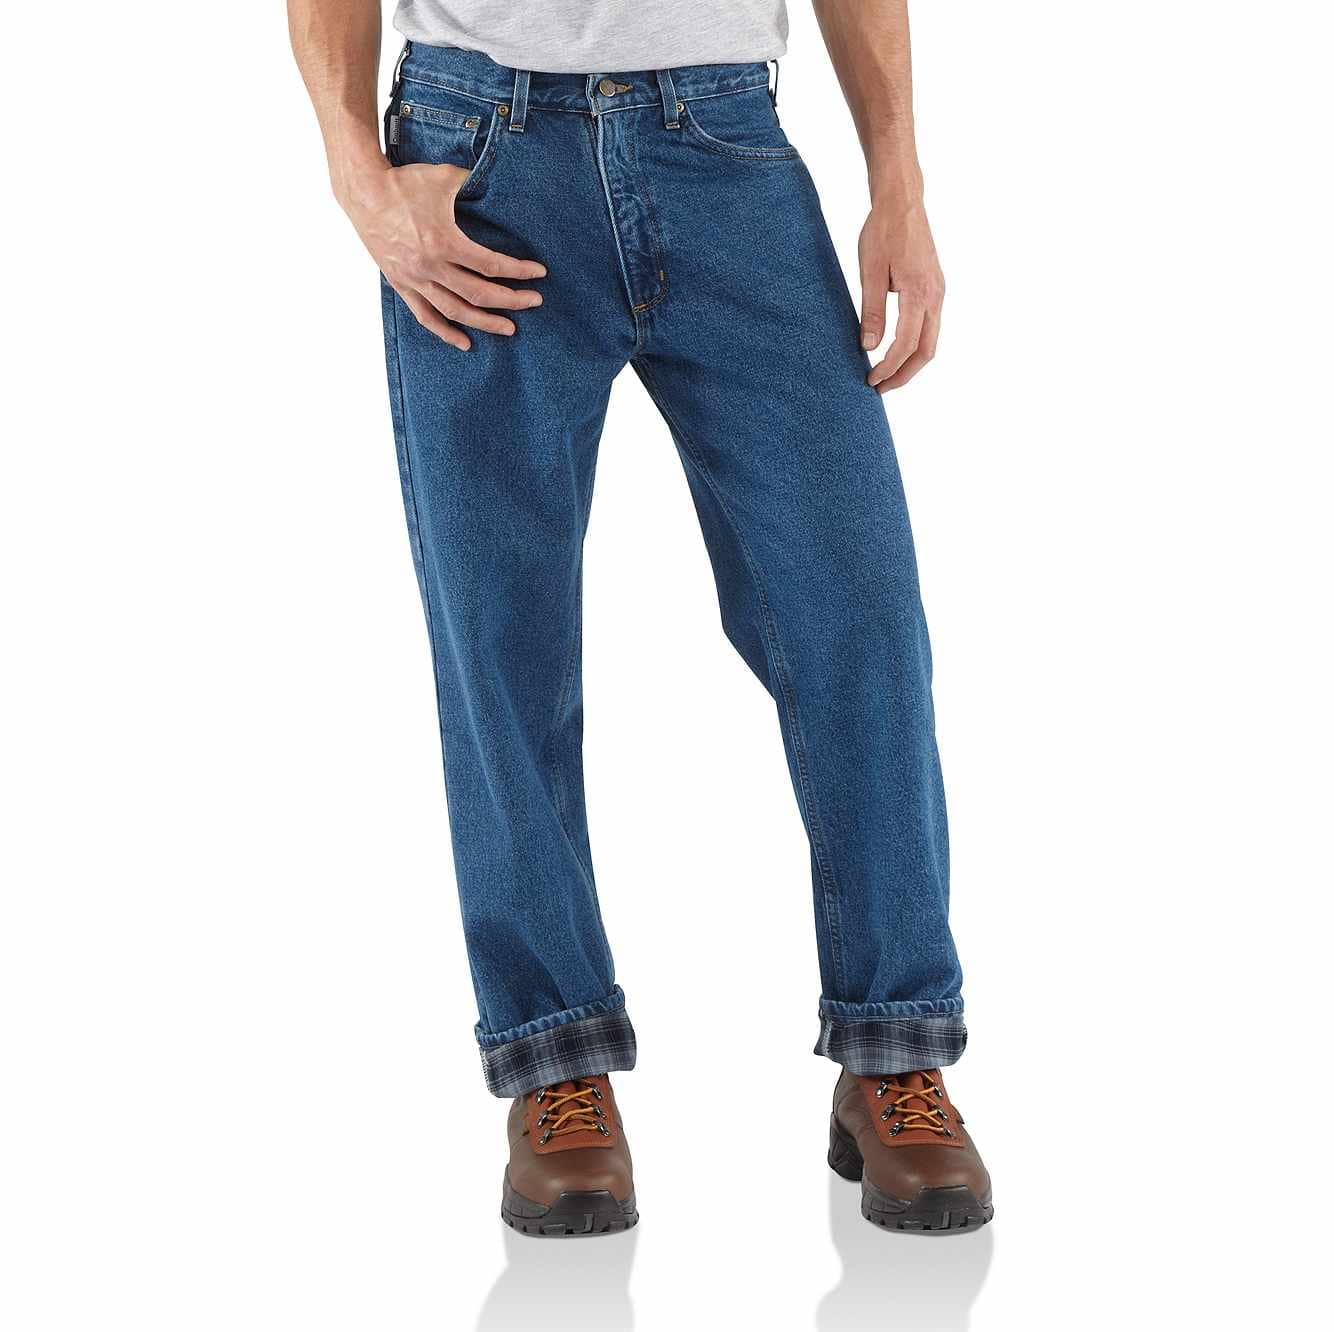 Carhartt Men's Flannel Lined Relax Fit Straight Leg Jeans